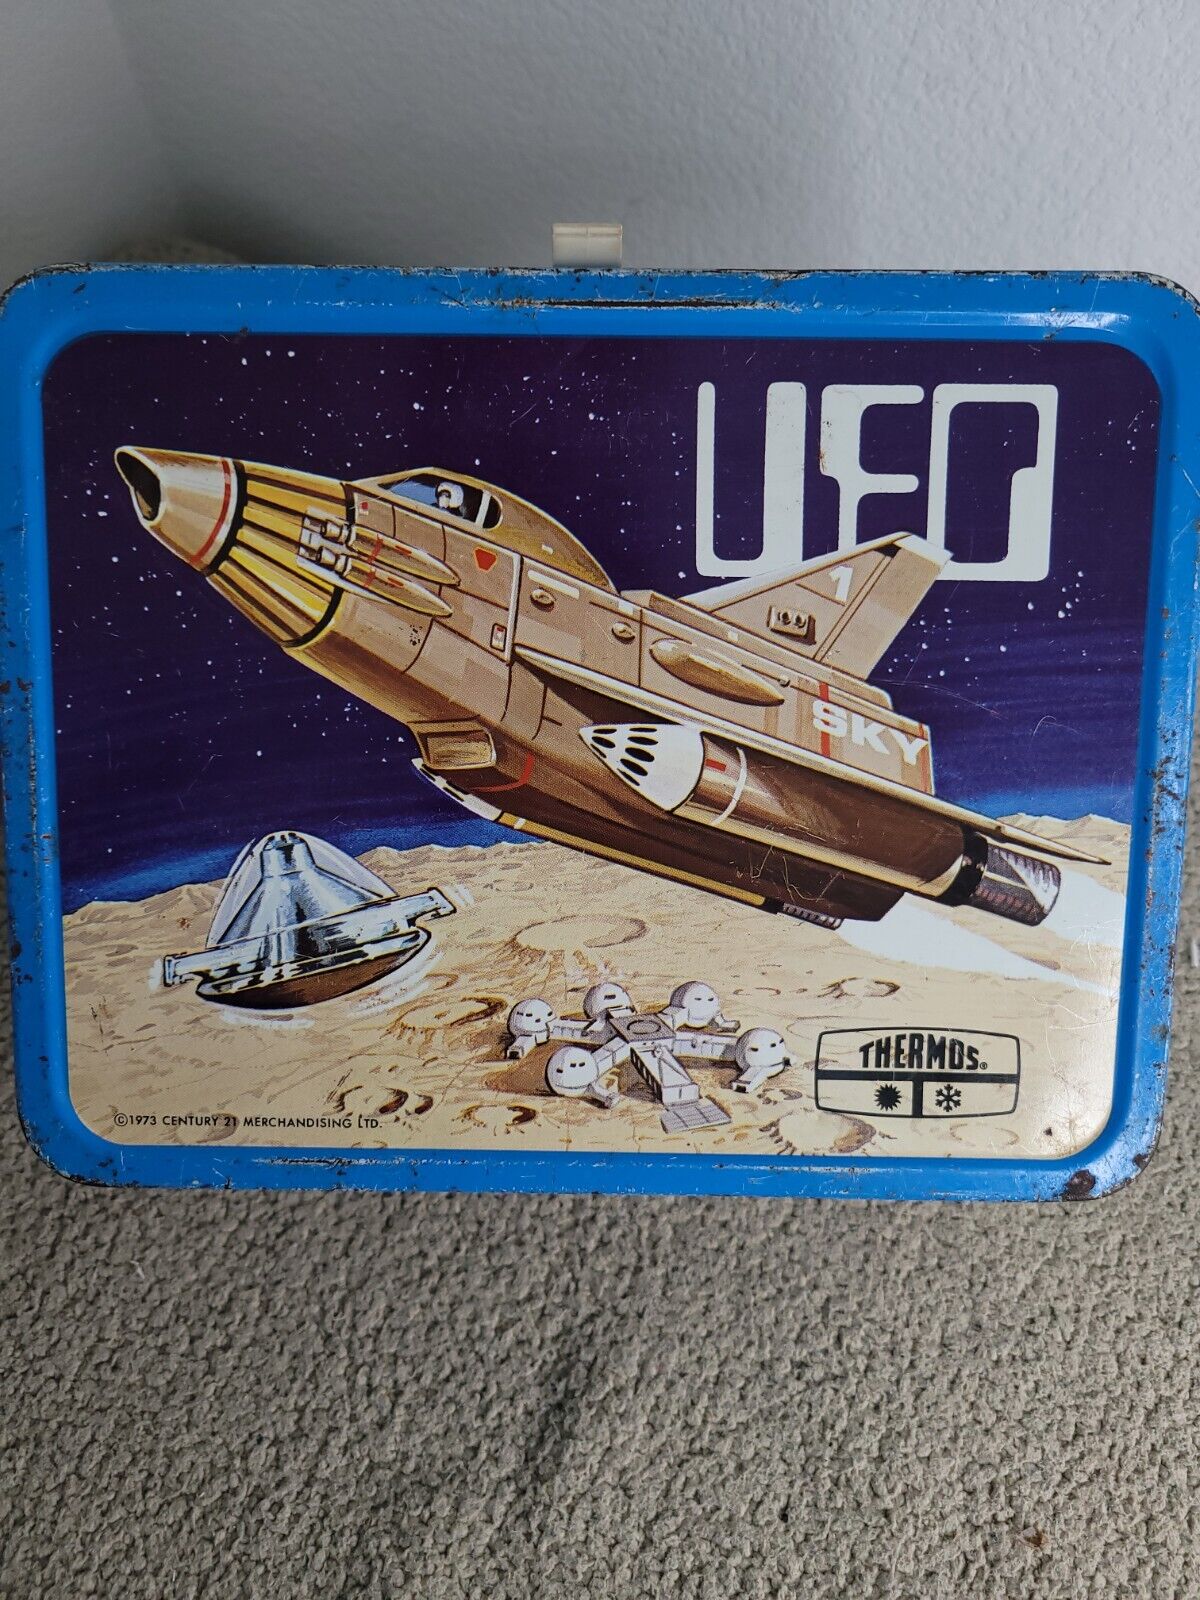 Vintage 1973 Thermos UFO Lunchbox space Belonged To Bobby Baker 😆 